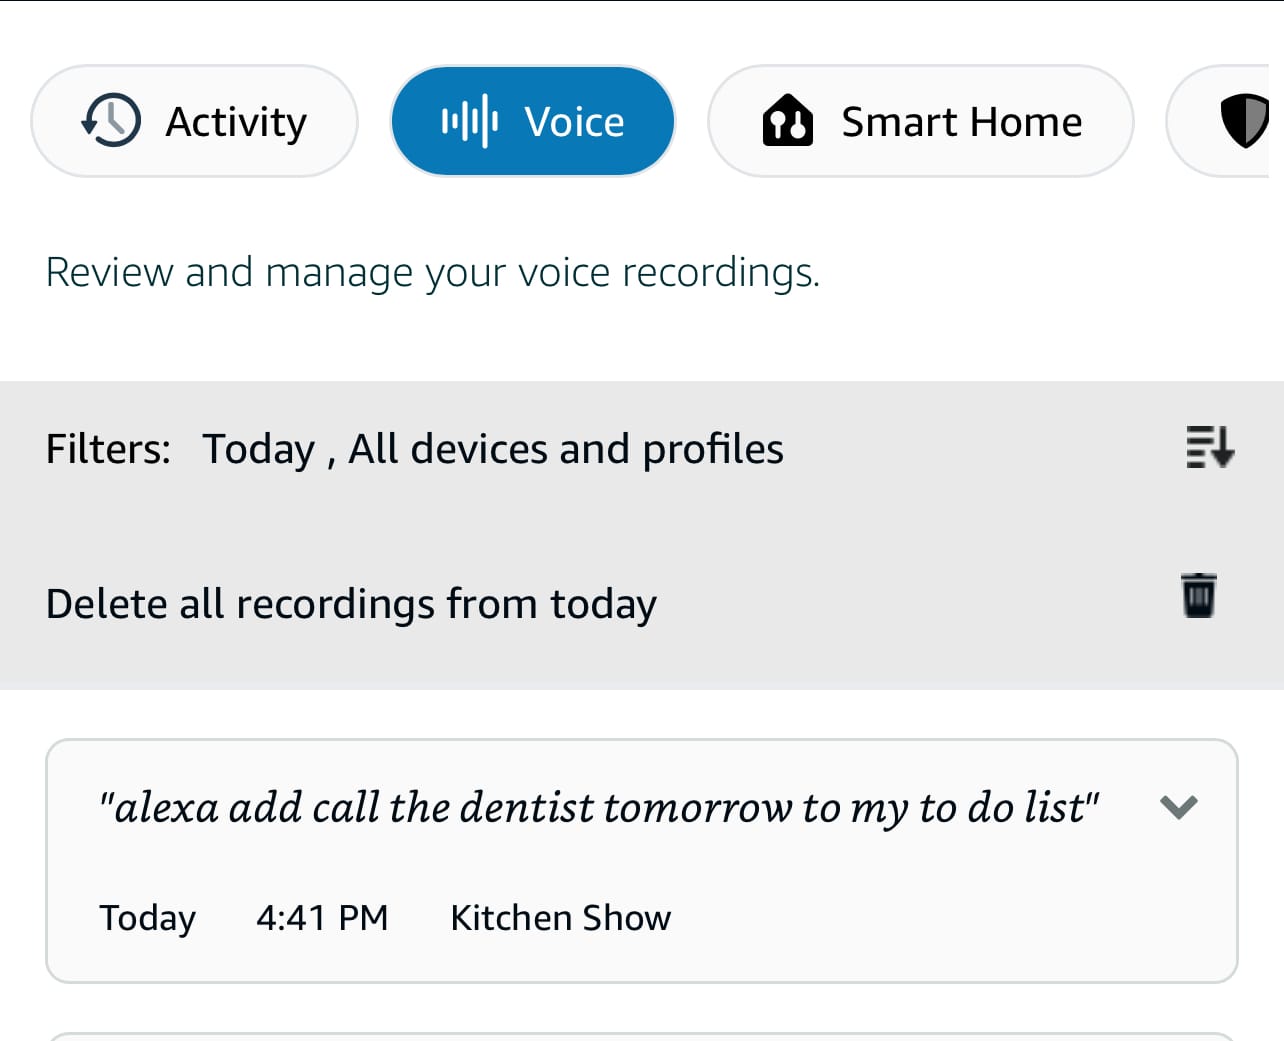 A screeshot of voice activity in the Alexa app